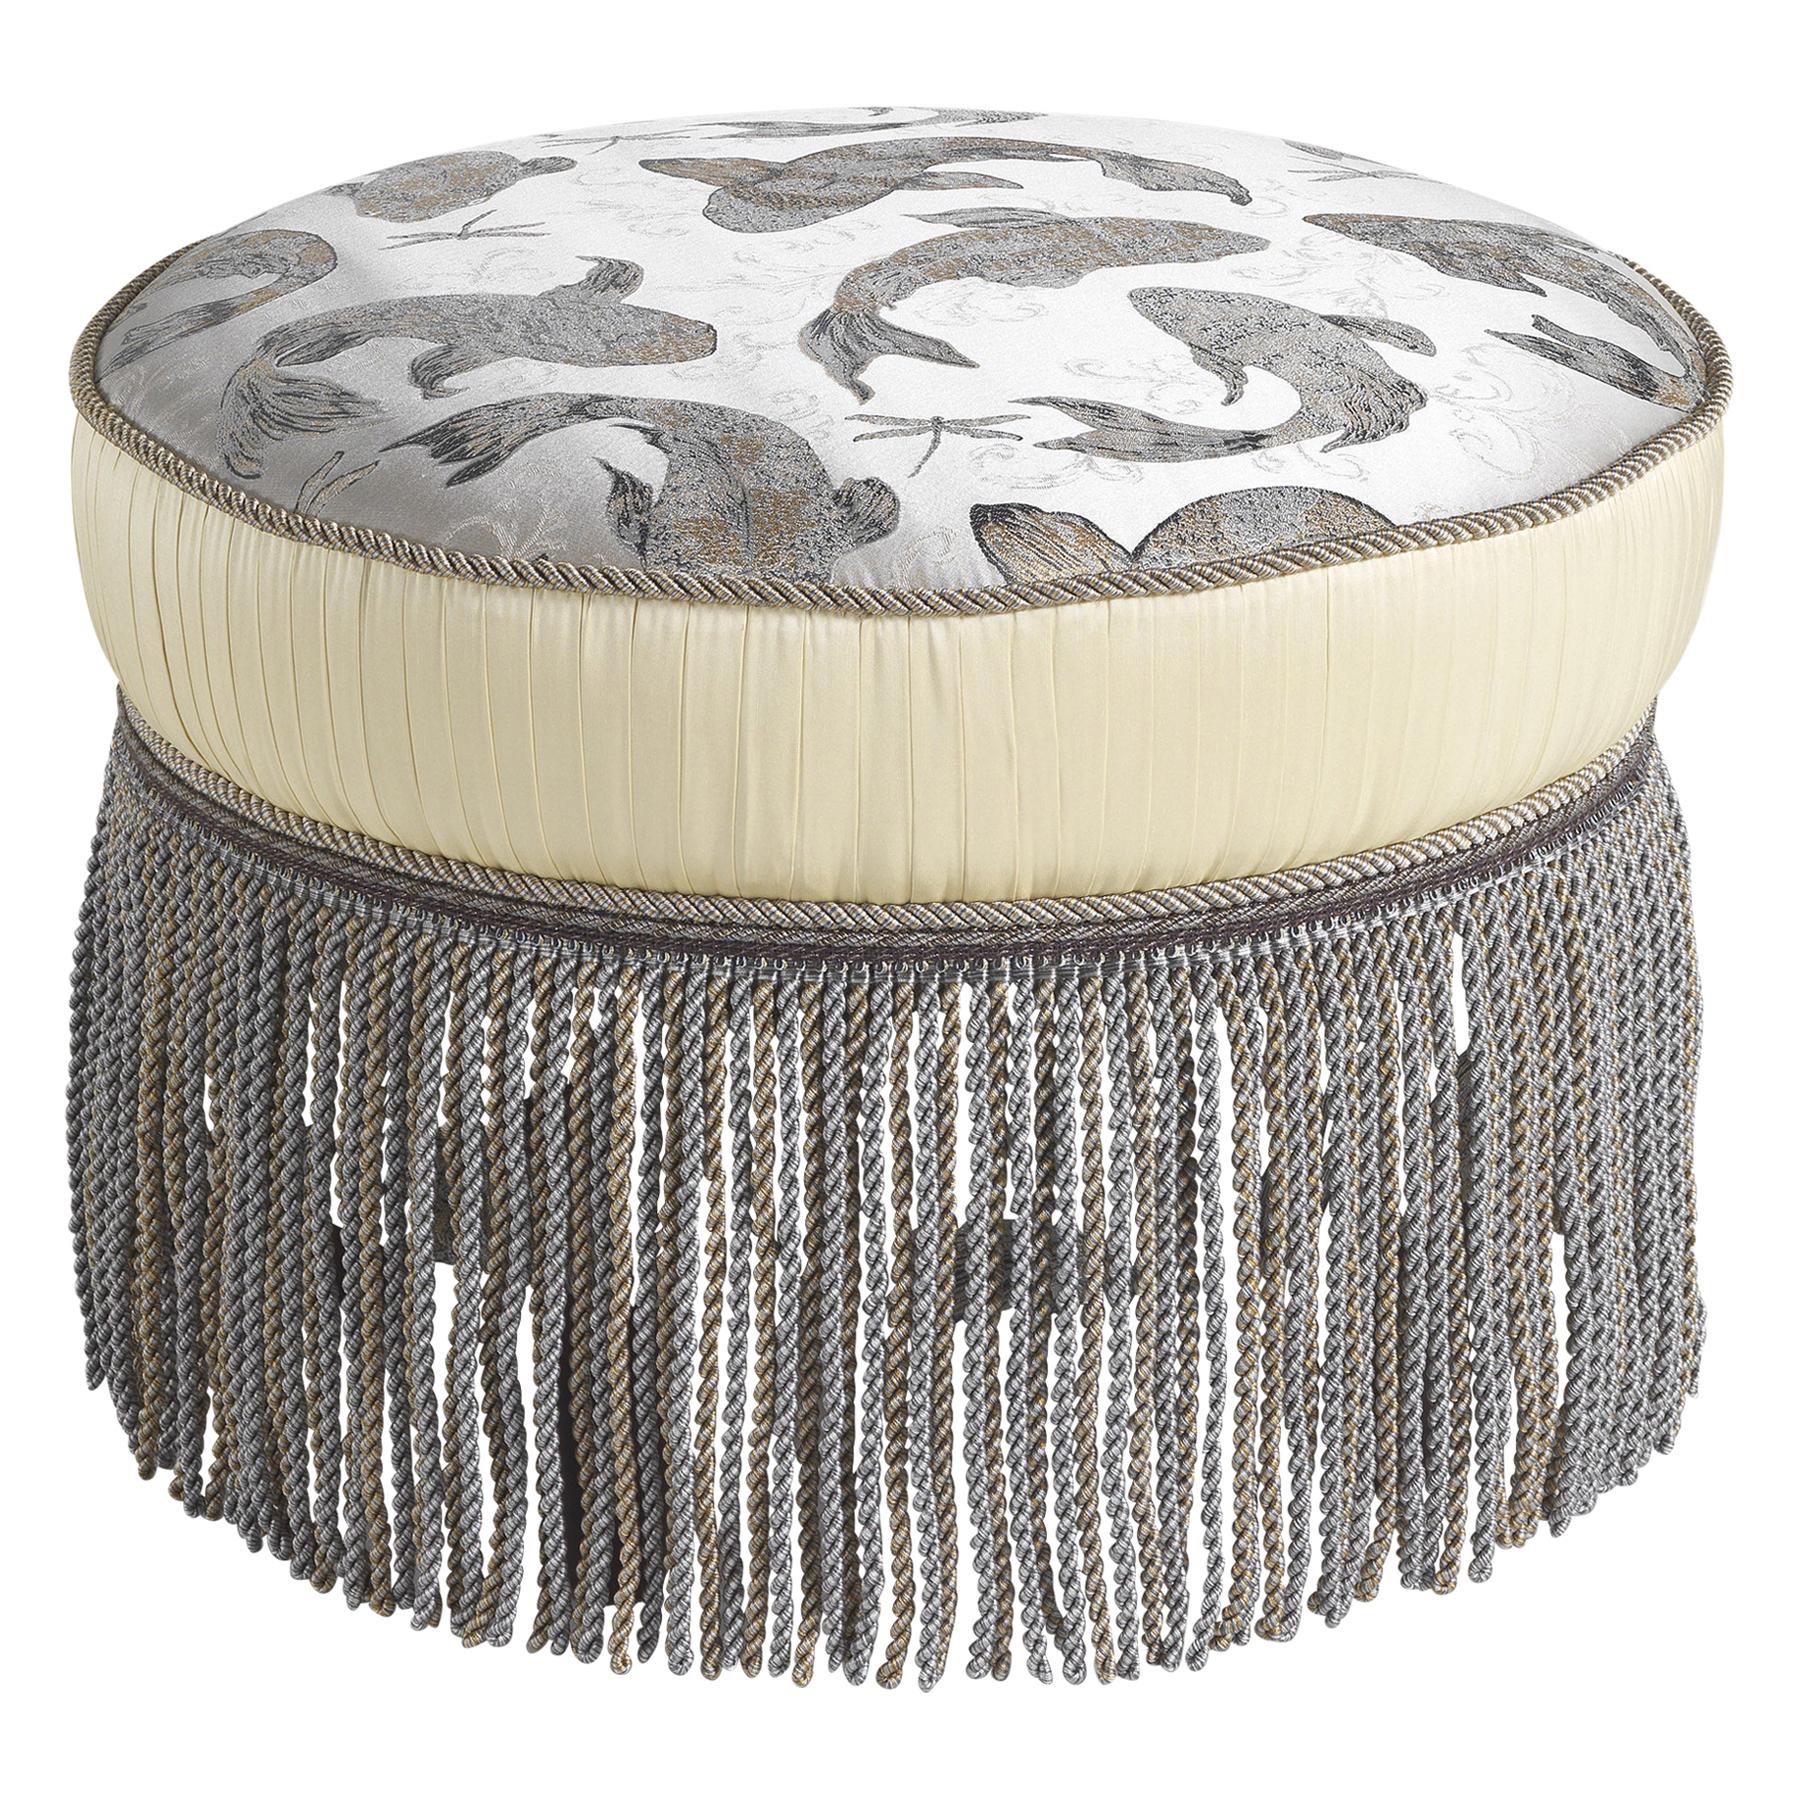 21st Century Madeleine Pouf in Fabric with Decorative Fringe